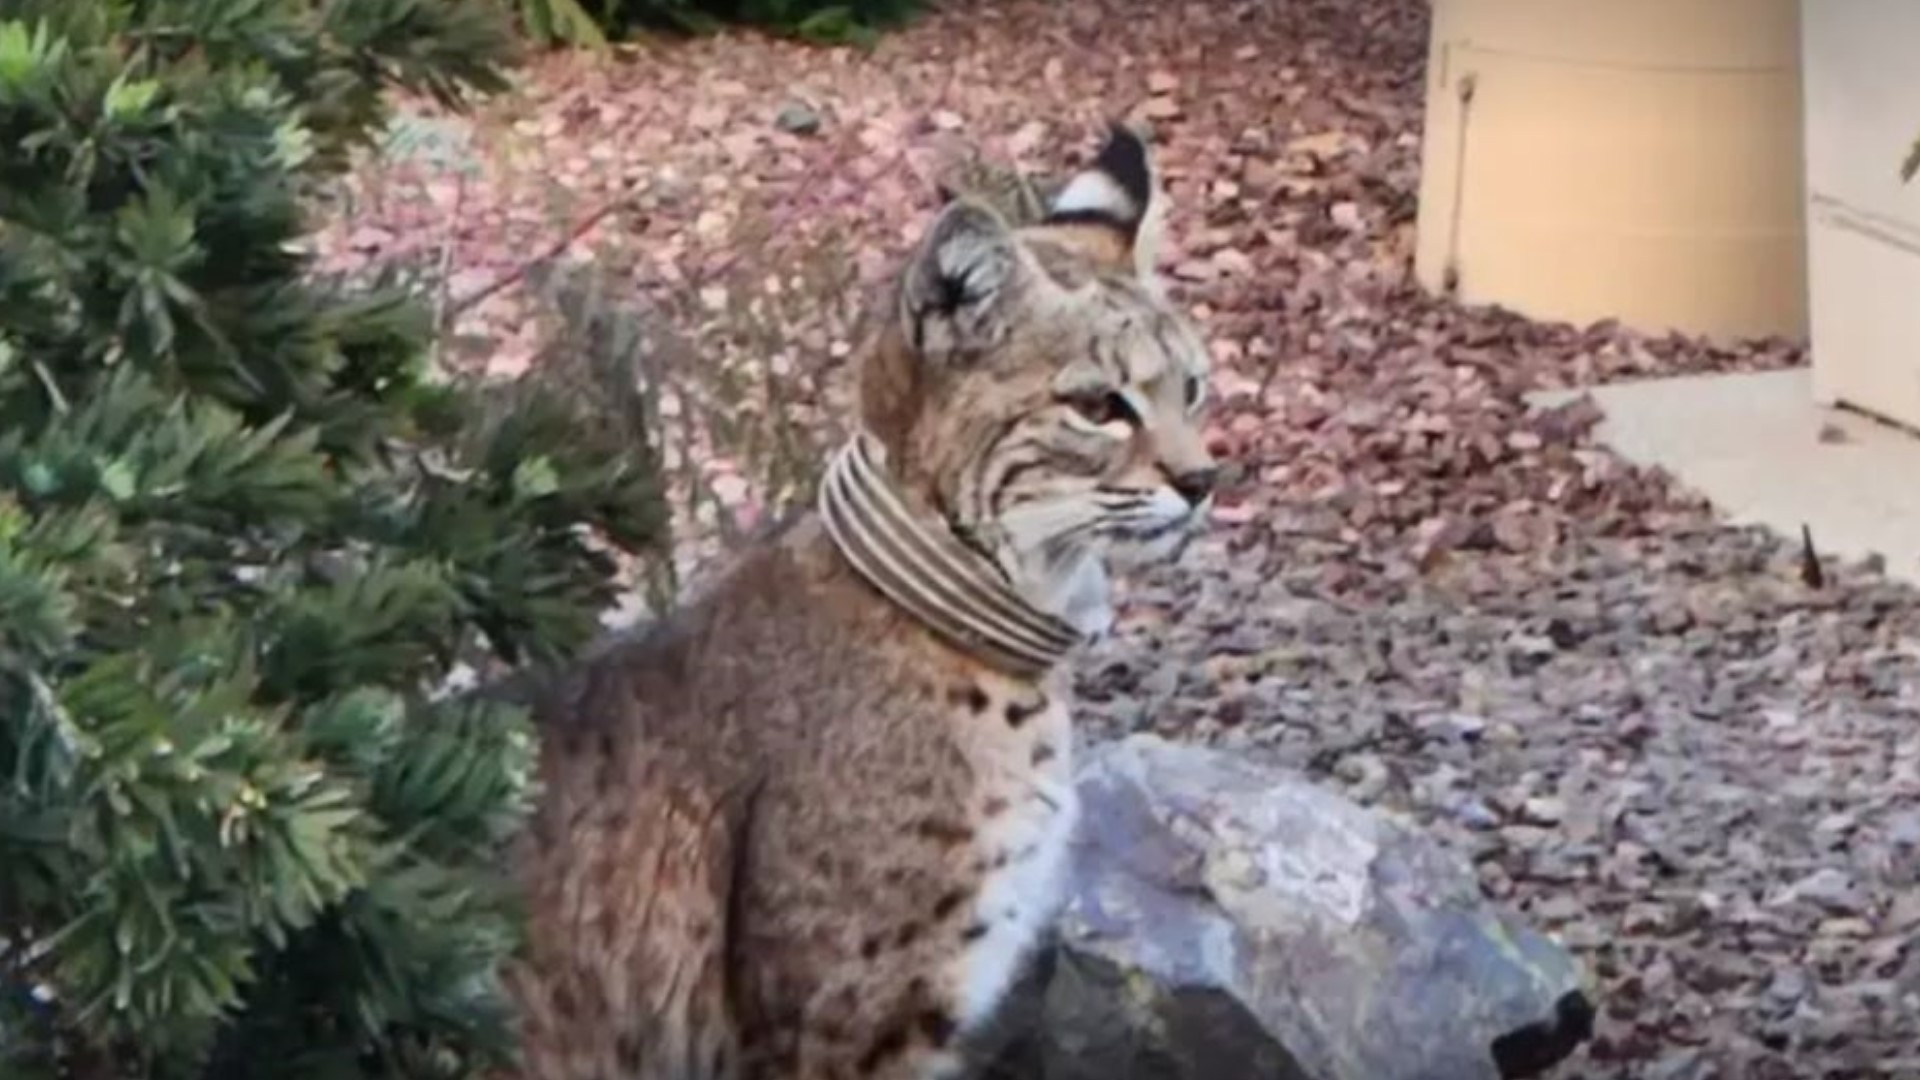 Neighbors in North Buckeye have grown increasingly concerned about a bobcat living with what appears to be a hose around its neck for three months.